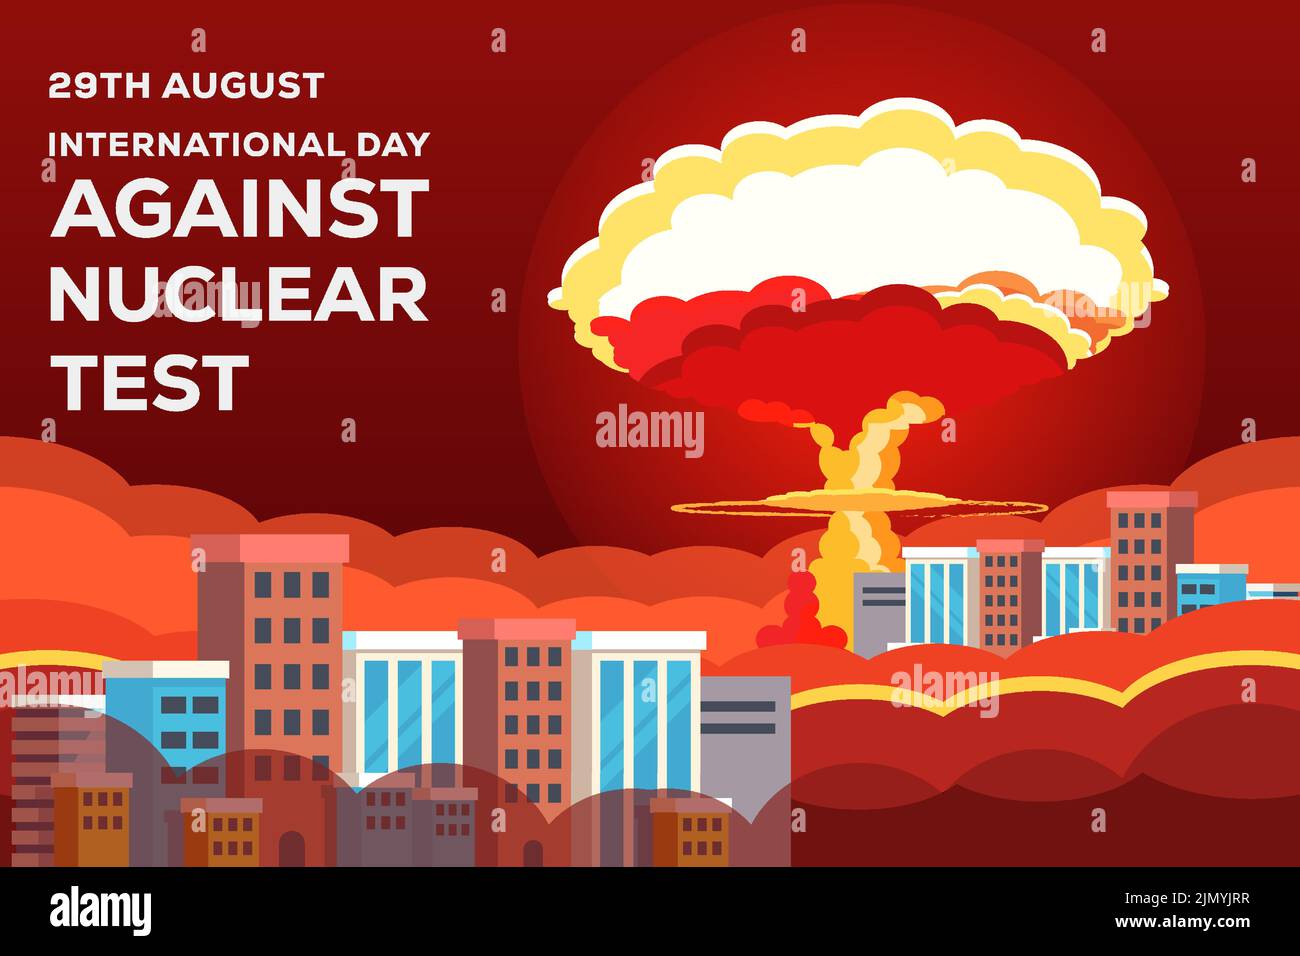 horizontal banner international day against nuclear test 29th august Stock Vector